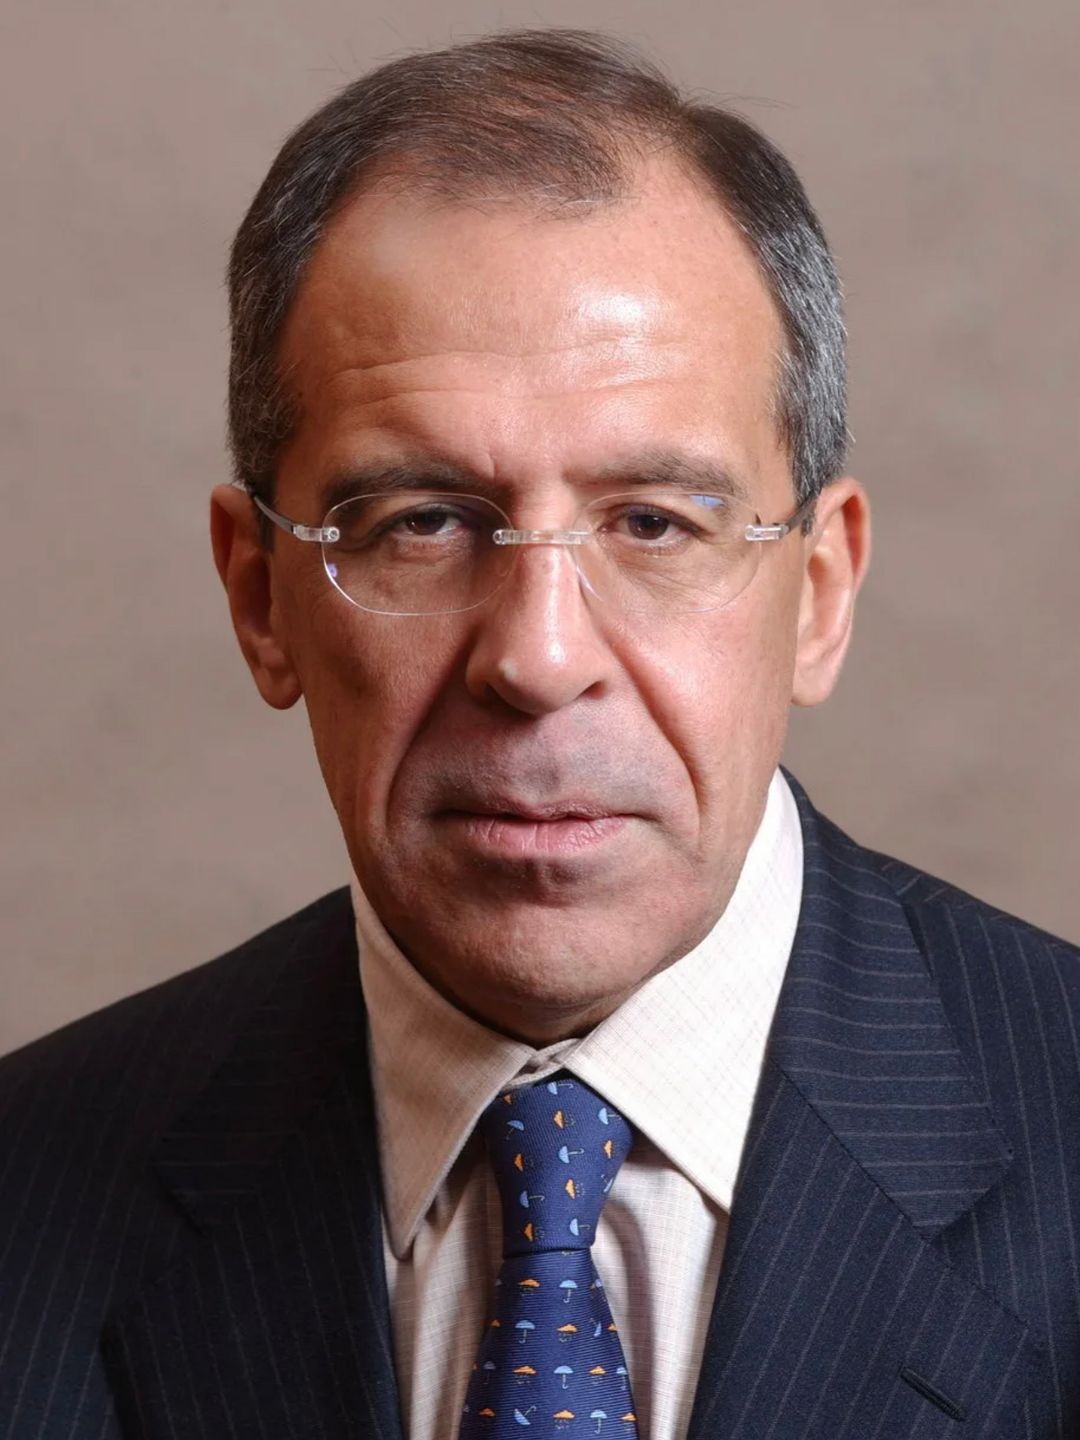 Sergey Lavrov who is he